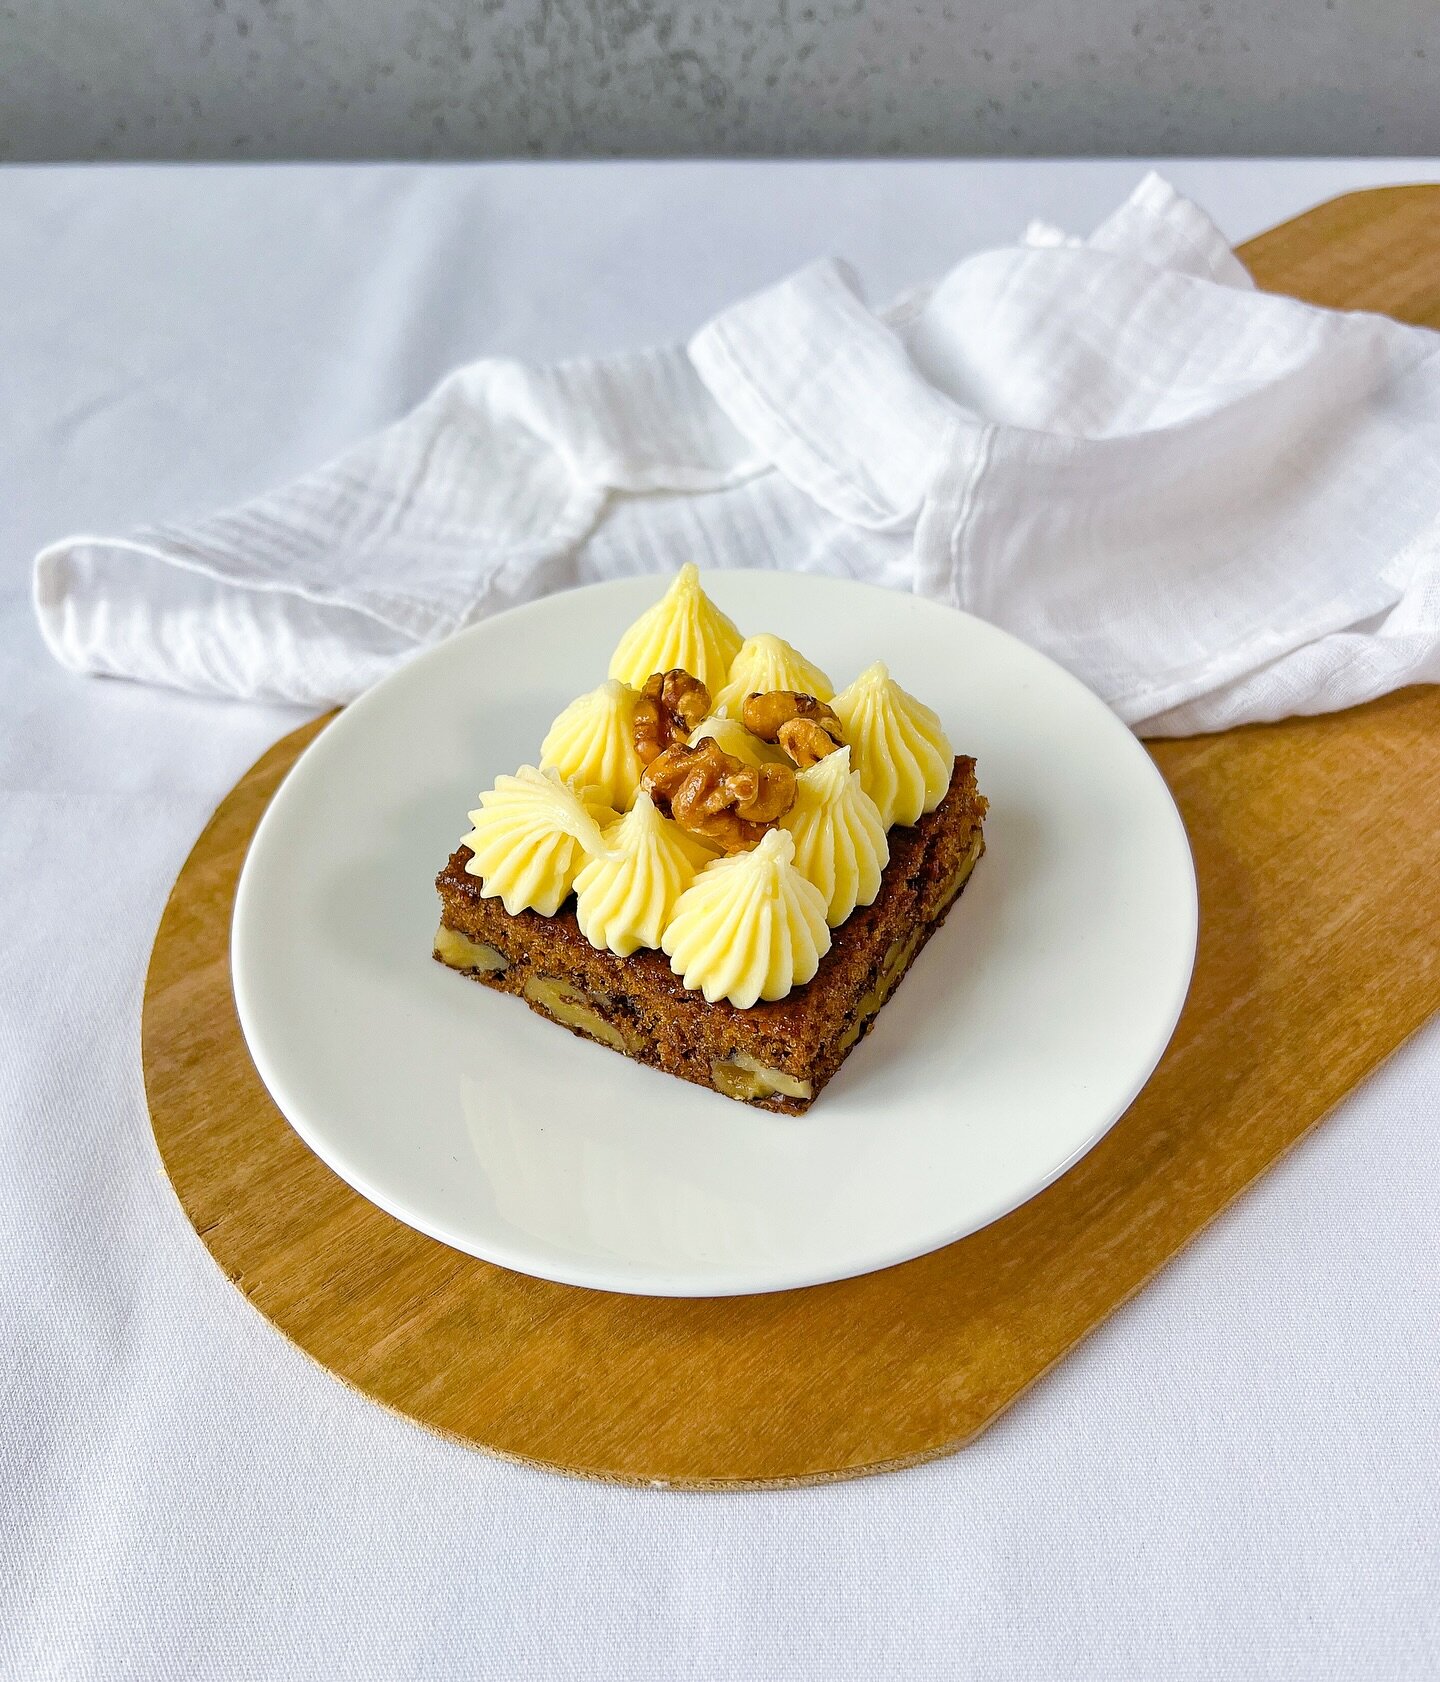 Treat yourself to our irresistible Carrot Cake this Easter! With its moist carrot and walnut base, luscious cream cheese icing, and caramelized walnut topping, it&rsquo;s the perfect sweet indulgence for the holiday season.
Enjoy a single slice, or g